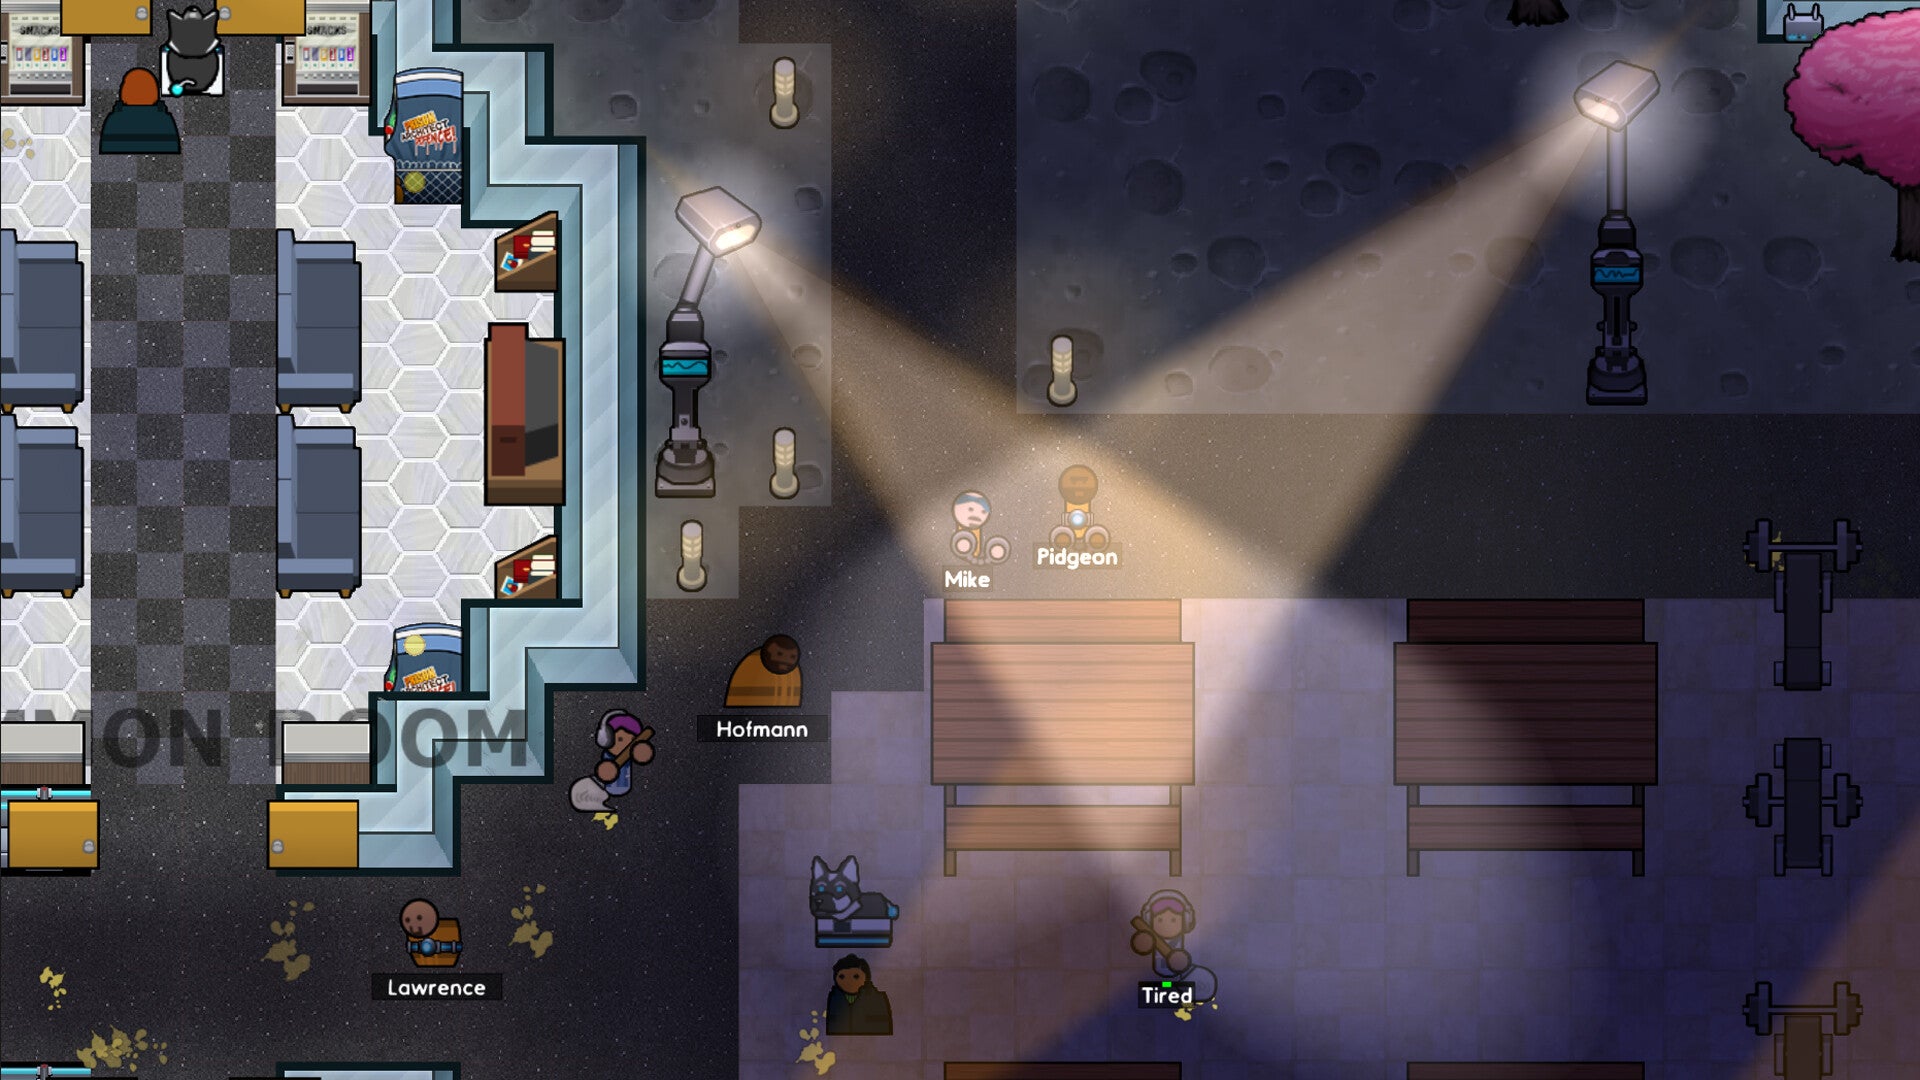 New searchlights and a robot dog in Prison Architect's Future Tech Pack DLC.